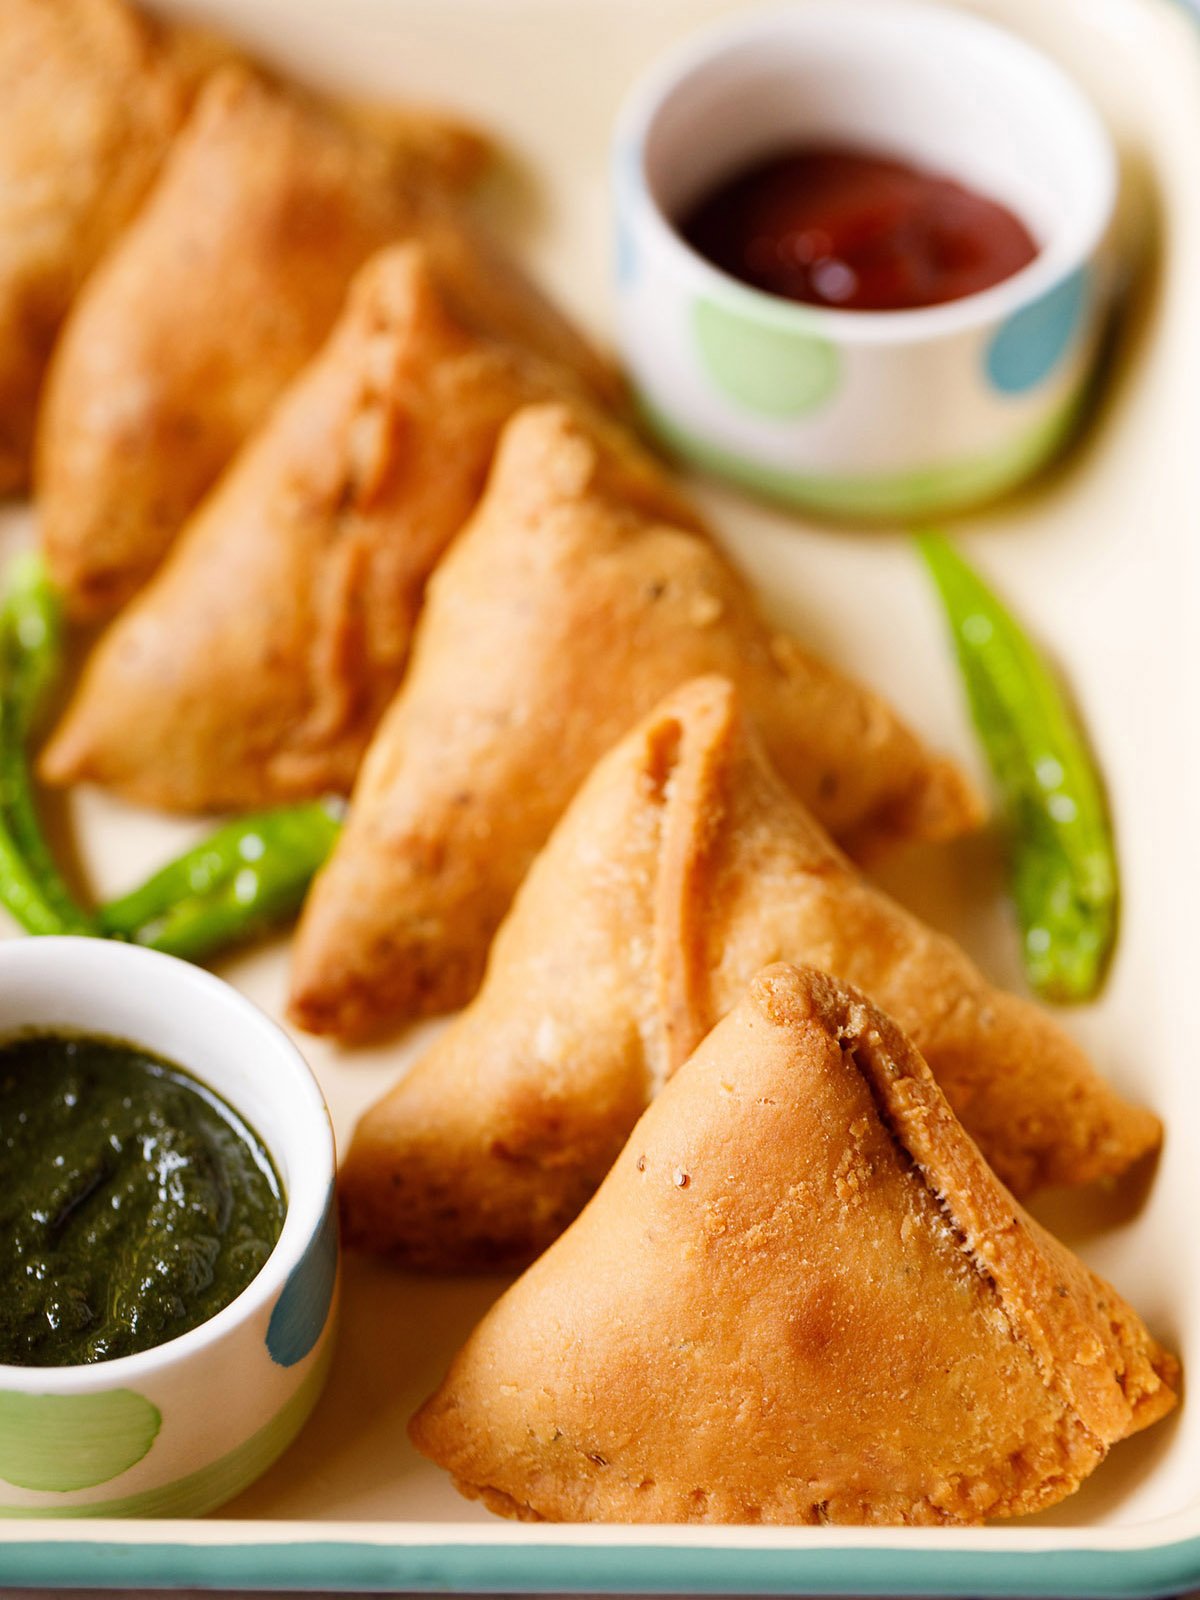 samosa stacked neatly on a cream tray with small bowls of chutney and salted fried green chillies